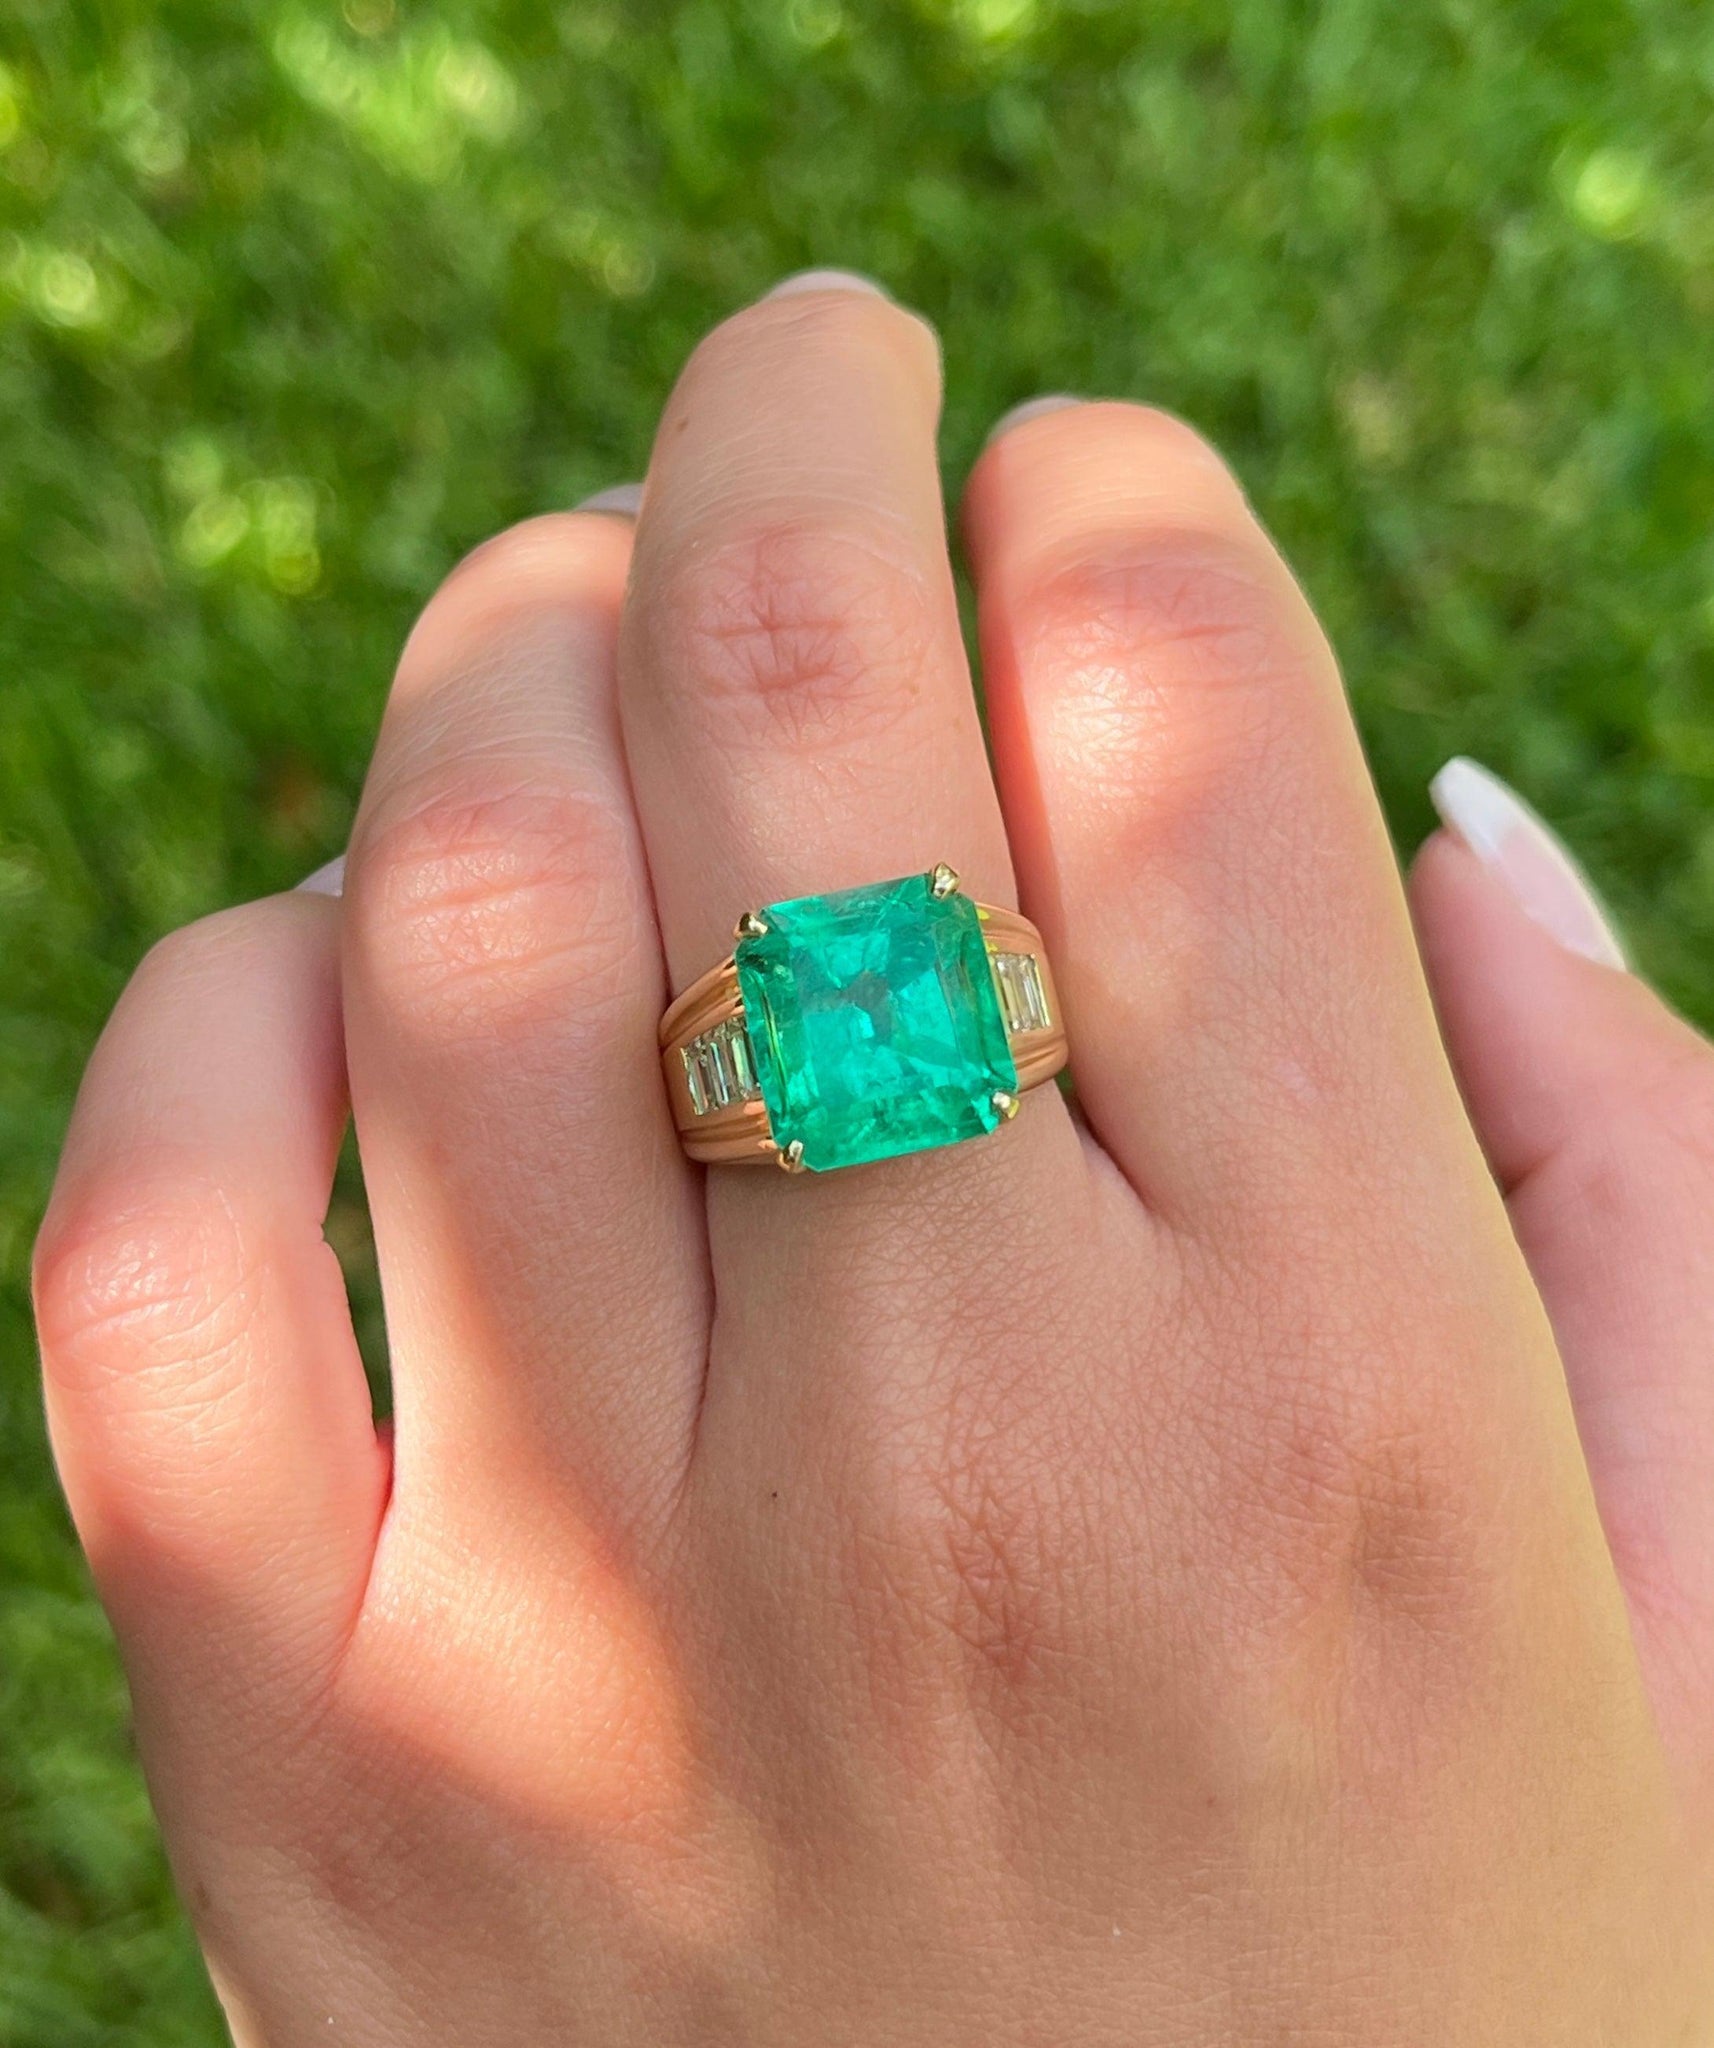 Buy Emerald Ring Natural Esmeralda Stone Real Gemstone Jewelry Handcrafted Ring  Mens Gifts Vivid Green Emerald Big Stone Men Rectangular Emerald Online in  India - Etsy